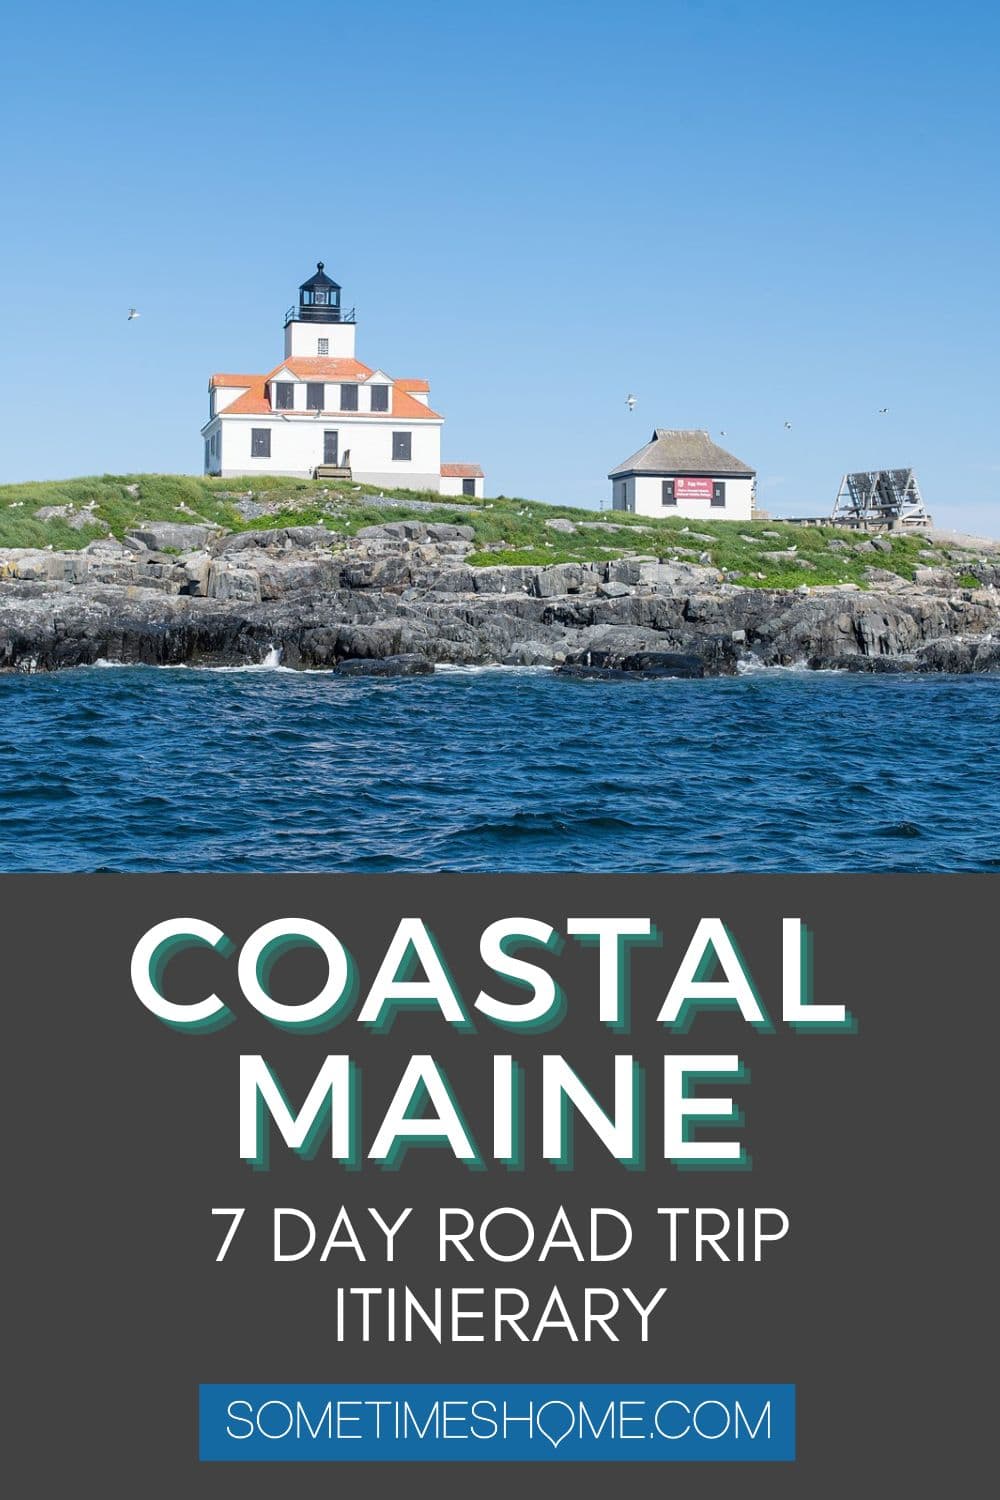 7-Day Coastal Maine Road Trip Itinerary with a picture of a lighthouse on a rocky island with grass.